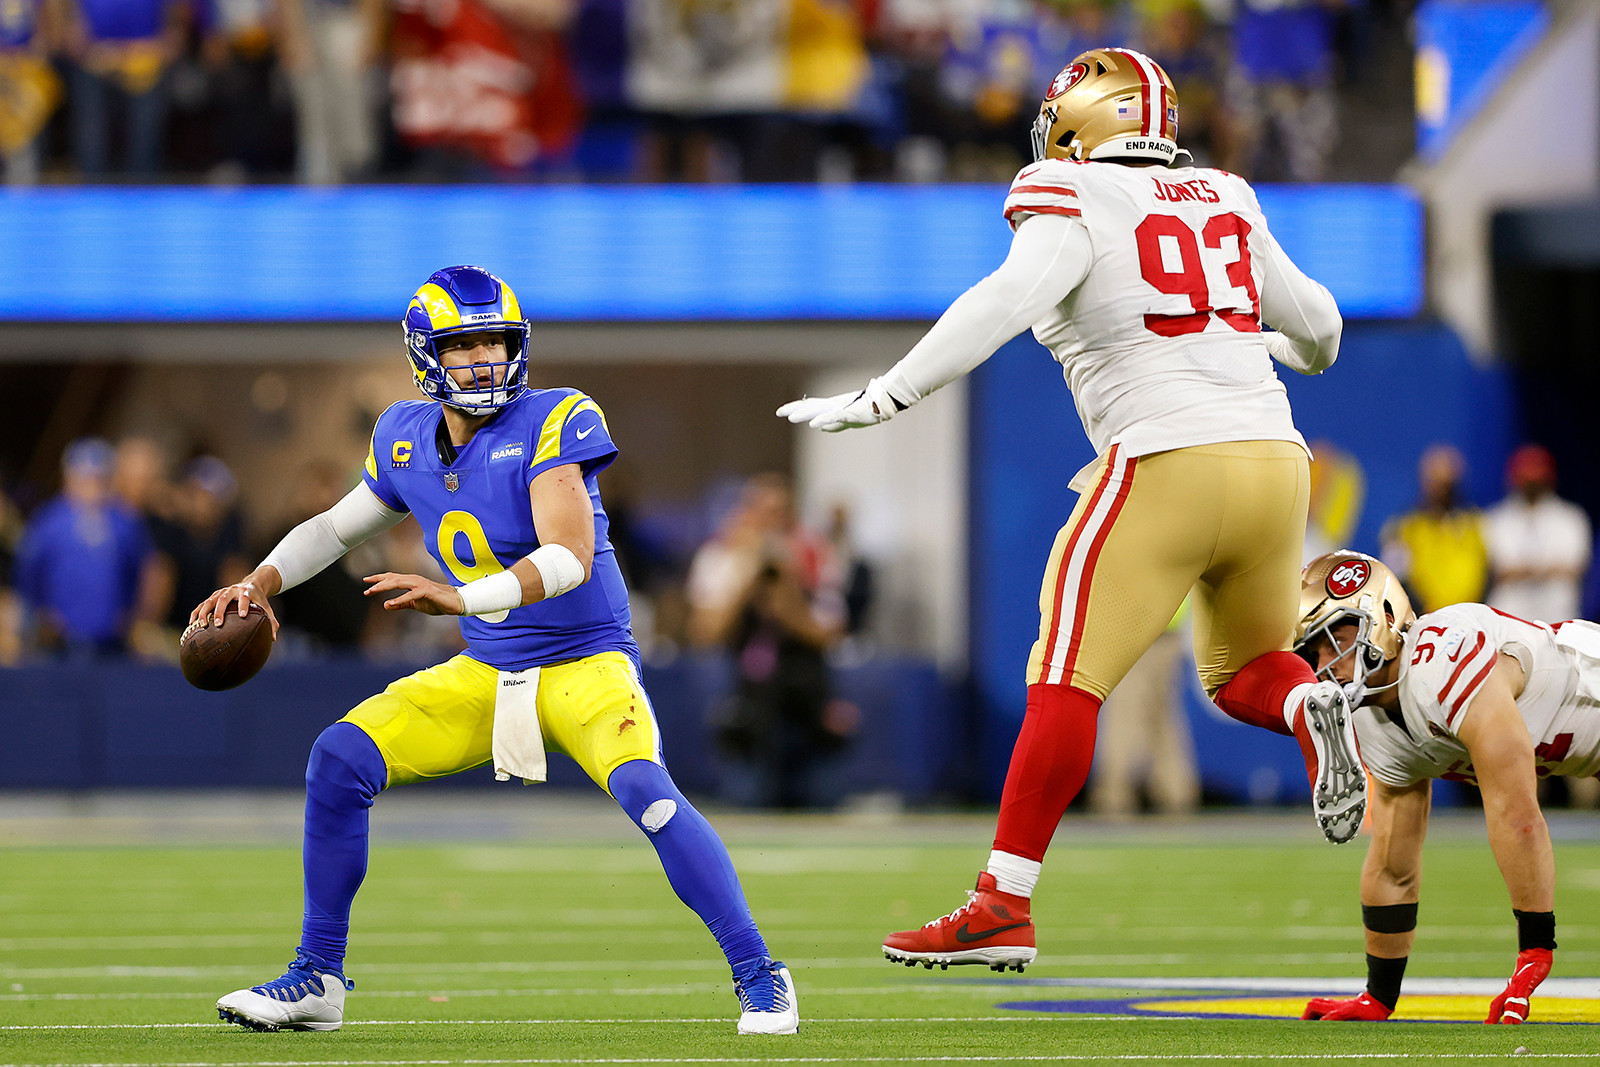 Matthew Stafford #9 of the Los Angeles Rams looks to pass against D.J. Jones #93 of the San Francisco 49ers in the third quarter during the NFC Championship Game at SoFi Stadium on January 30, in Inglewood, California.